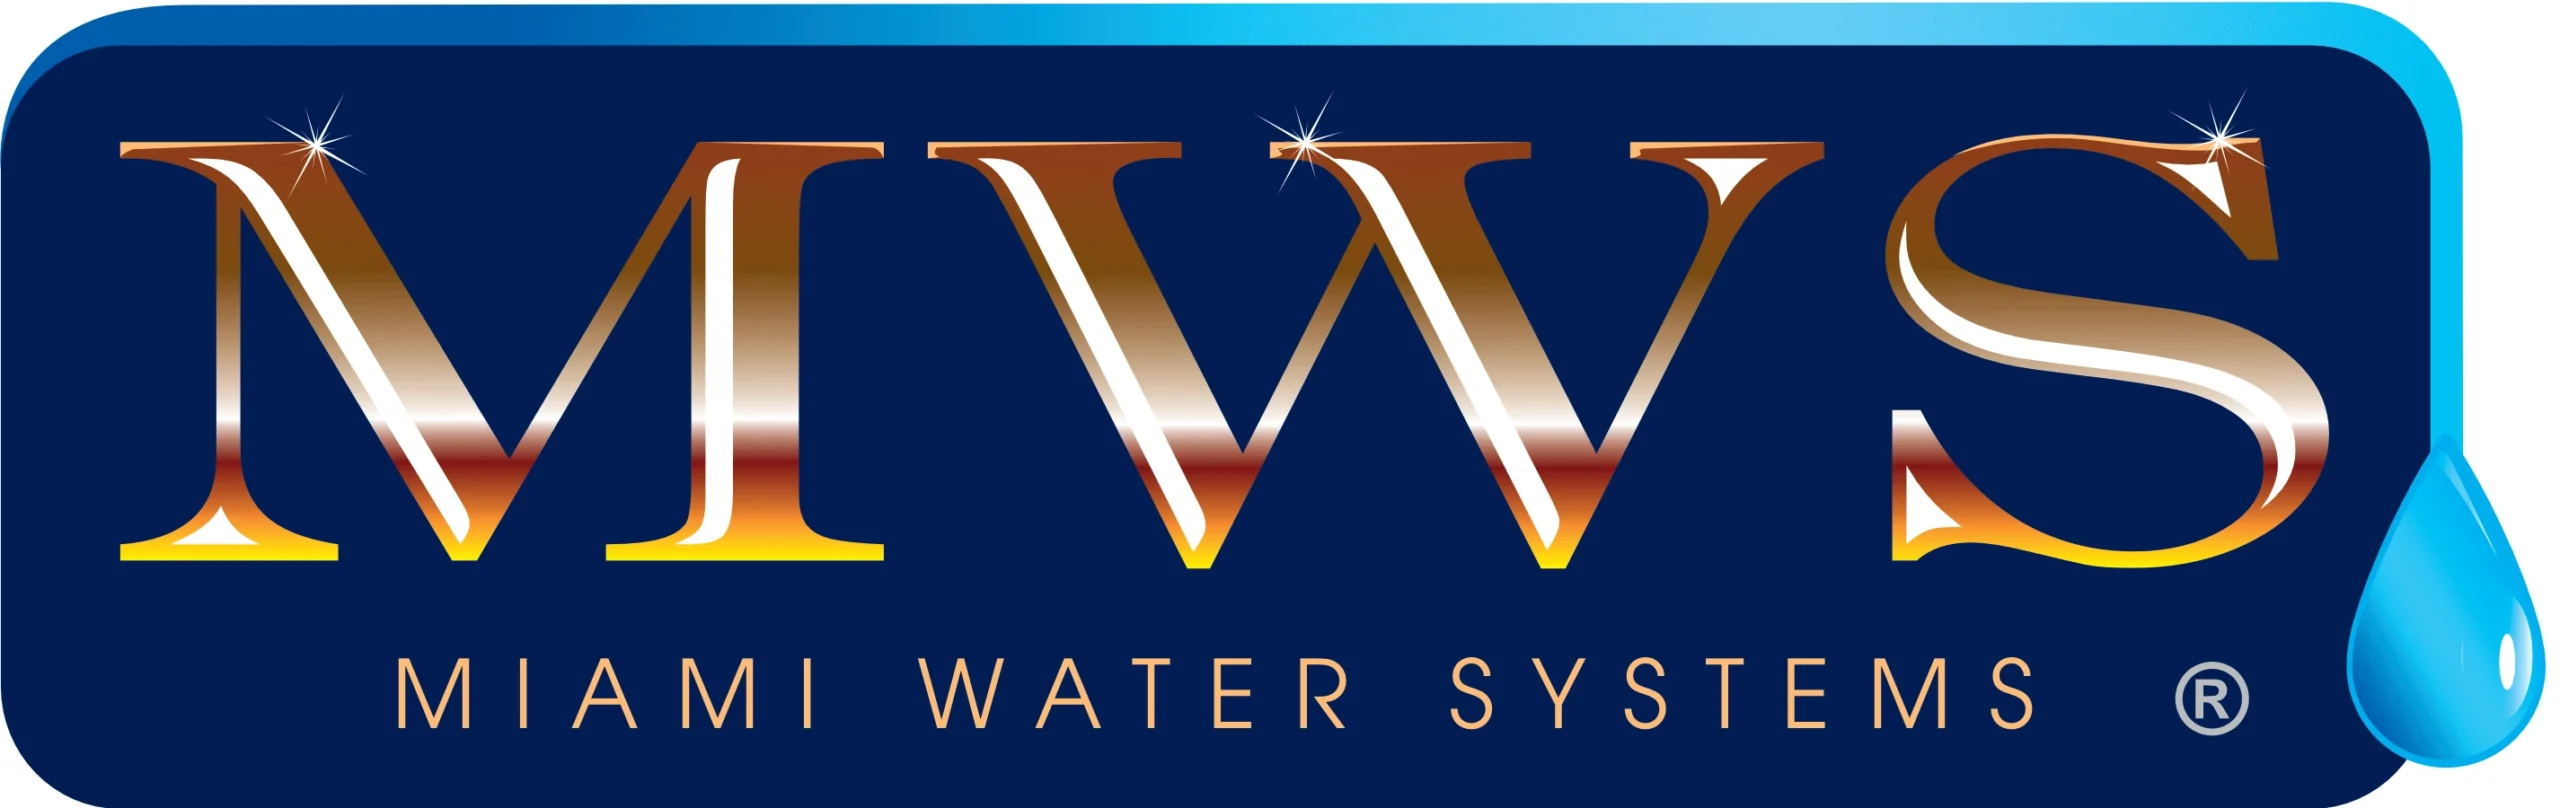 Miami Water Systems